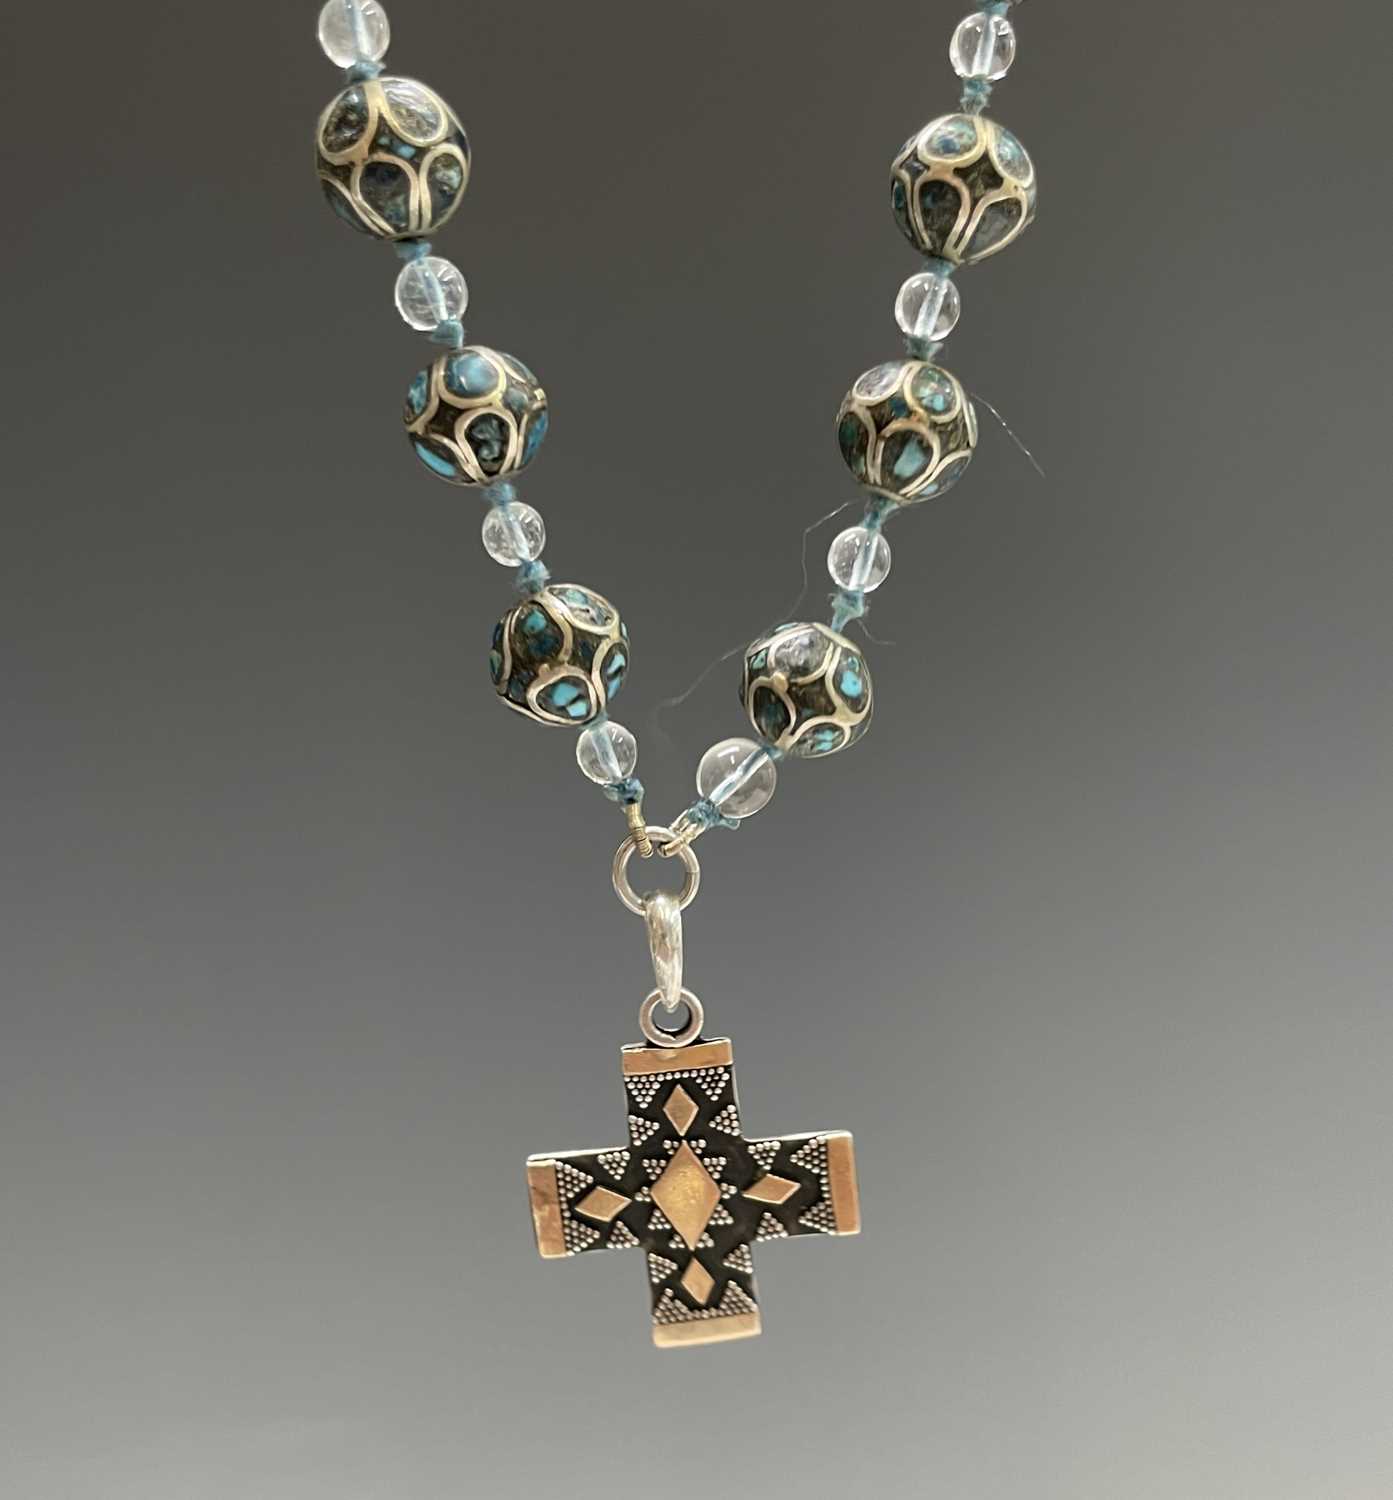 Fifteen rosary bead necklaces, all with unique decorative crosses. - Image 7 of 20